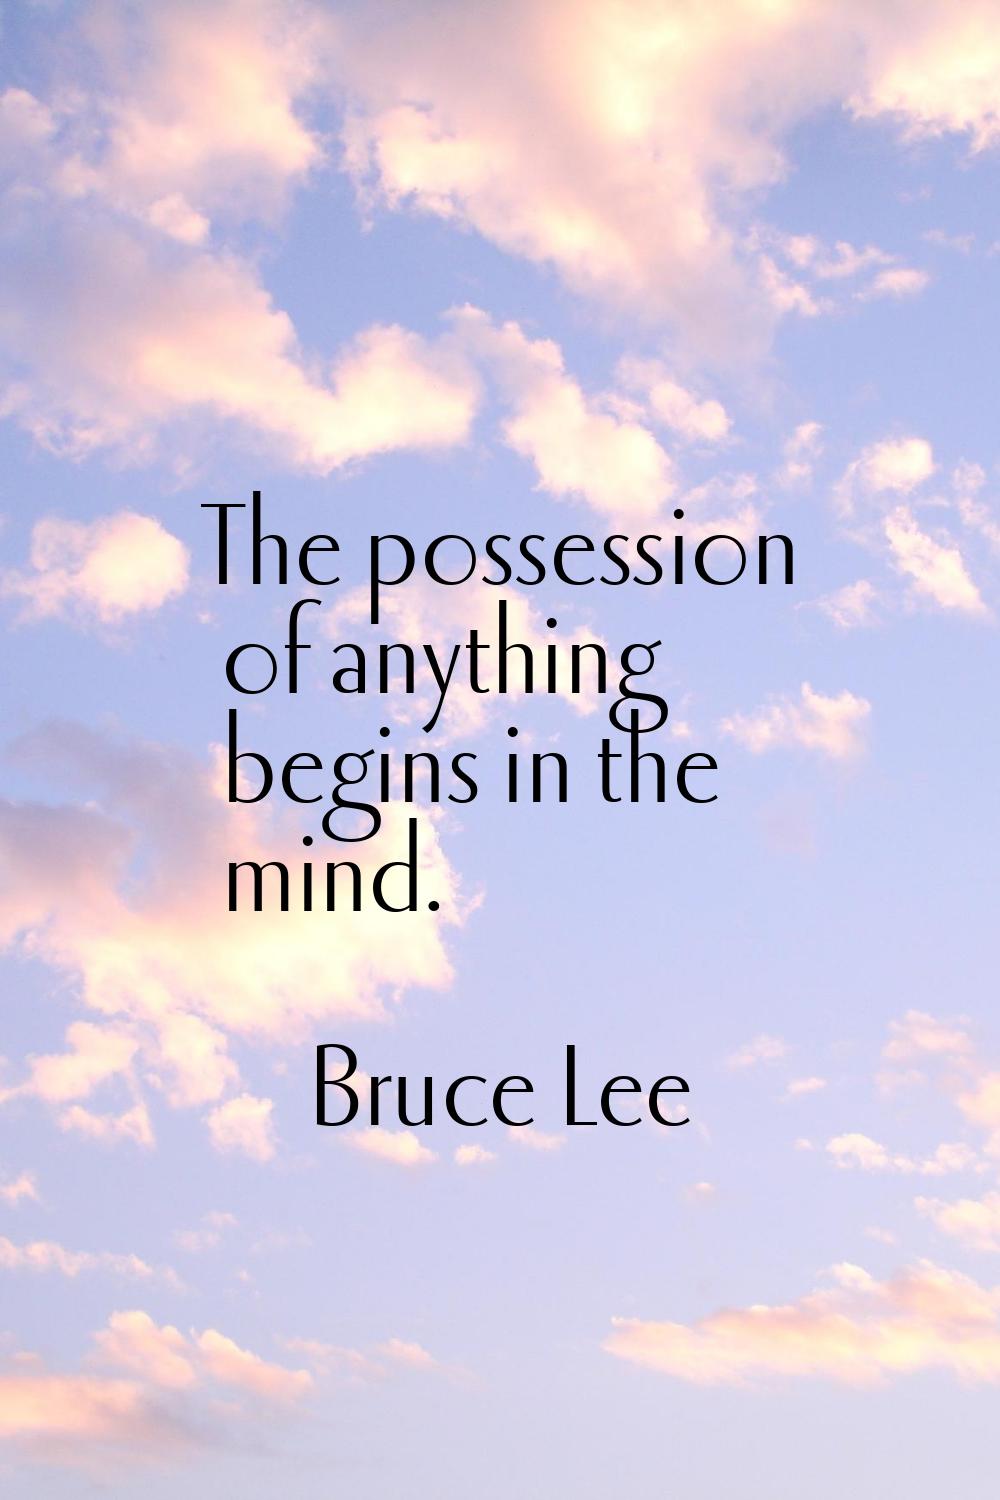 The possession of anything begins in the mind.